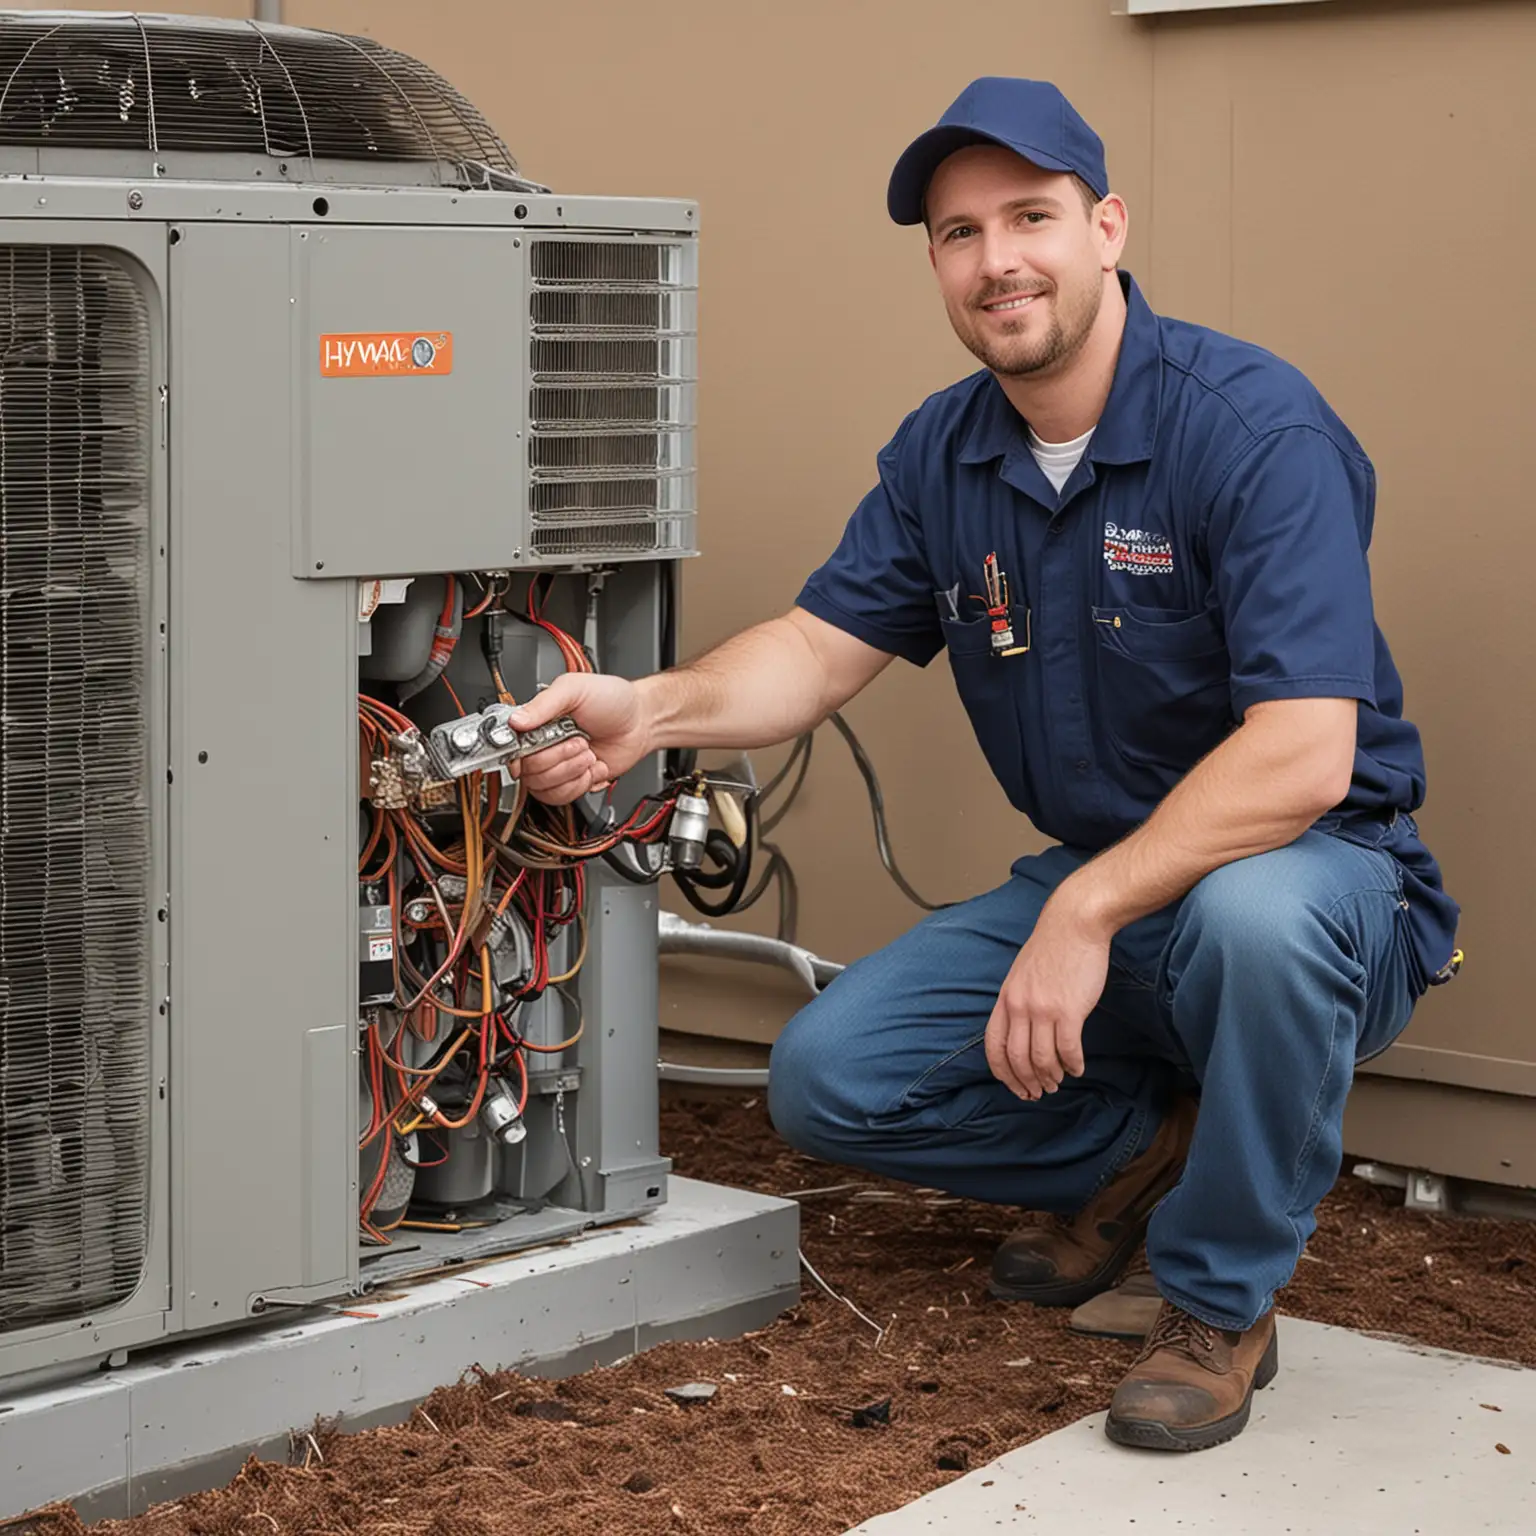 HVAC Worker Installing Air Conditioning System